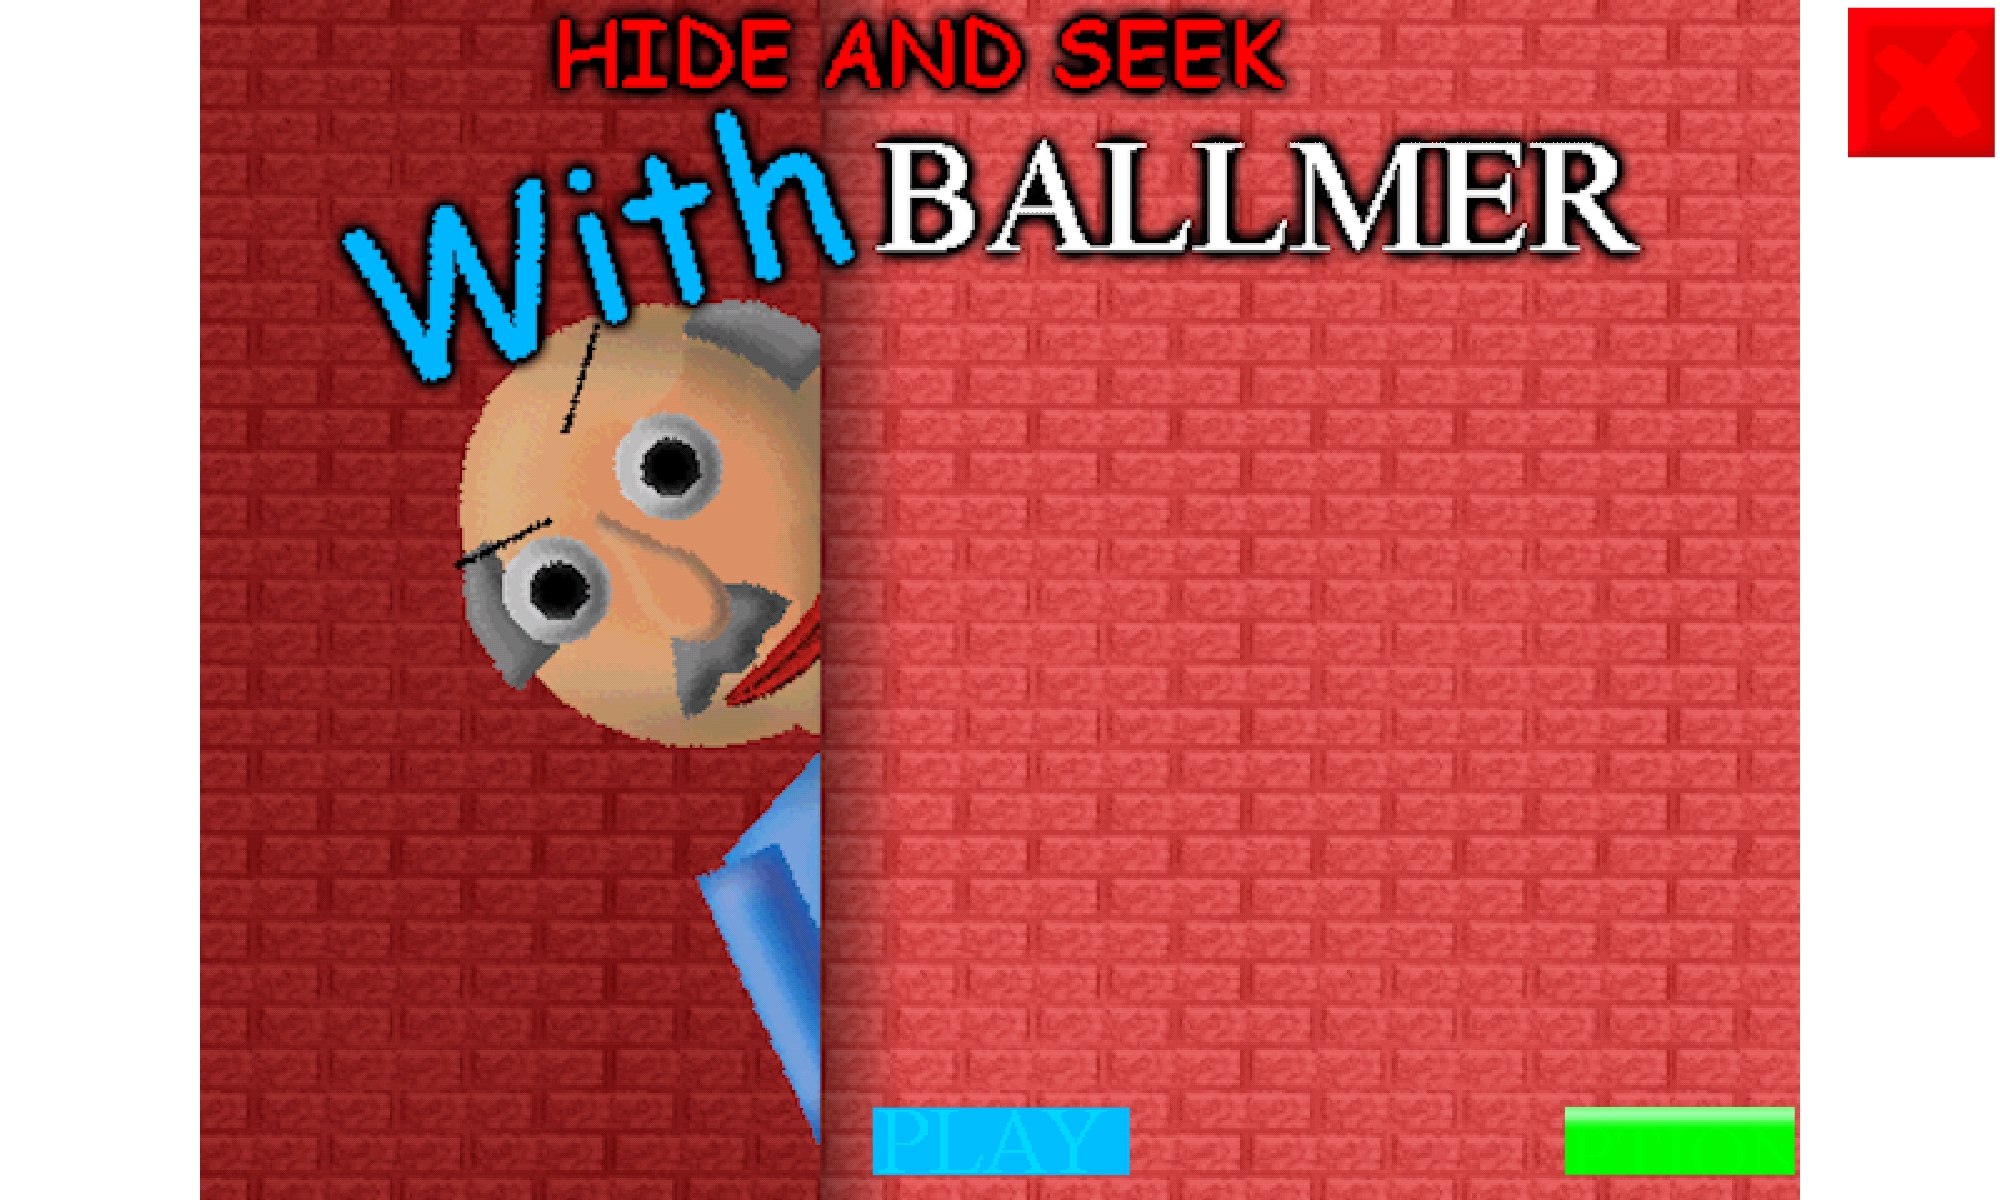 Hide and seek with ballmer Android port